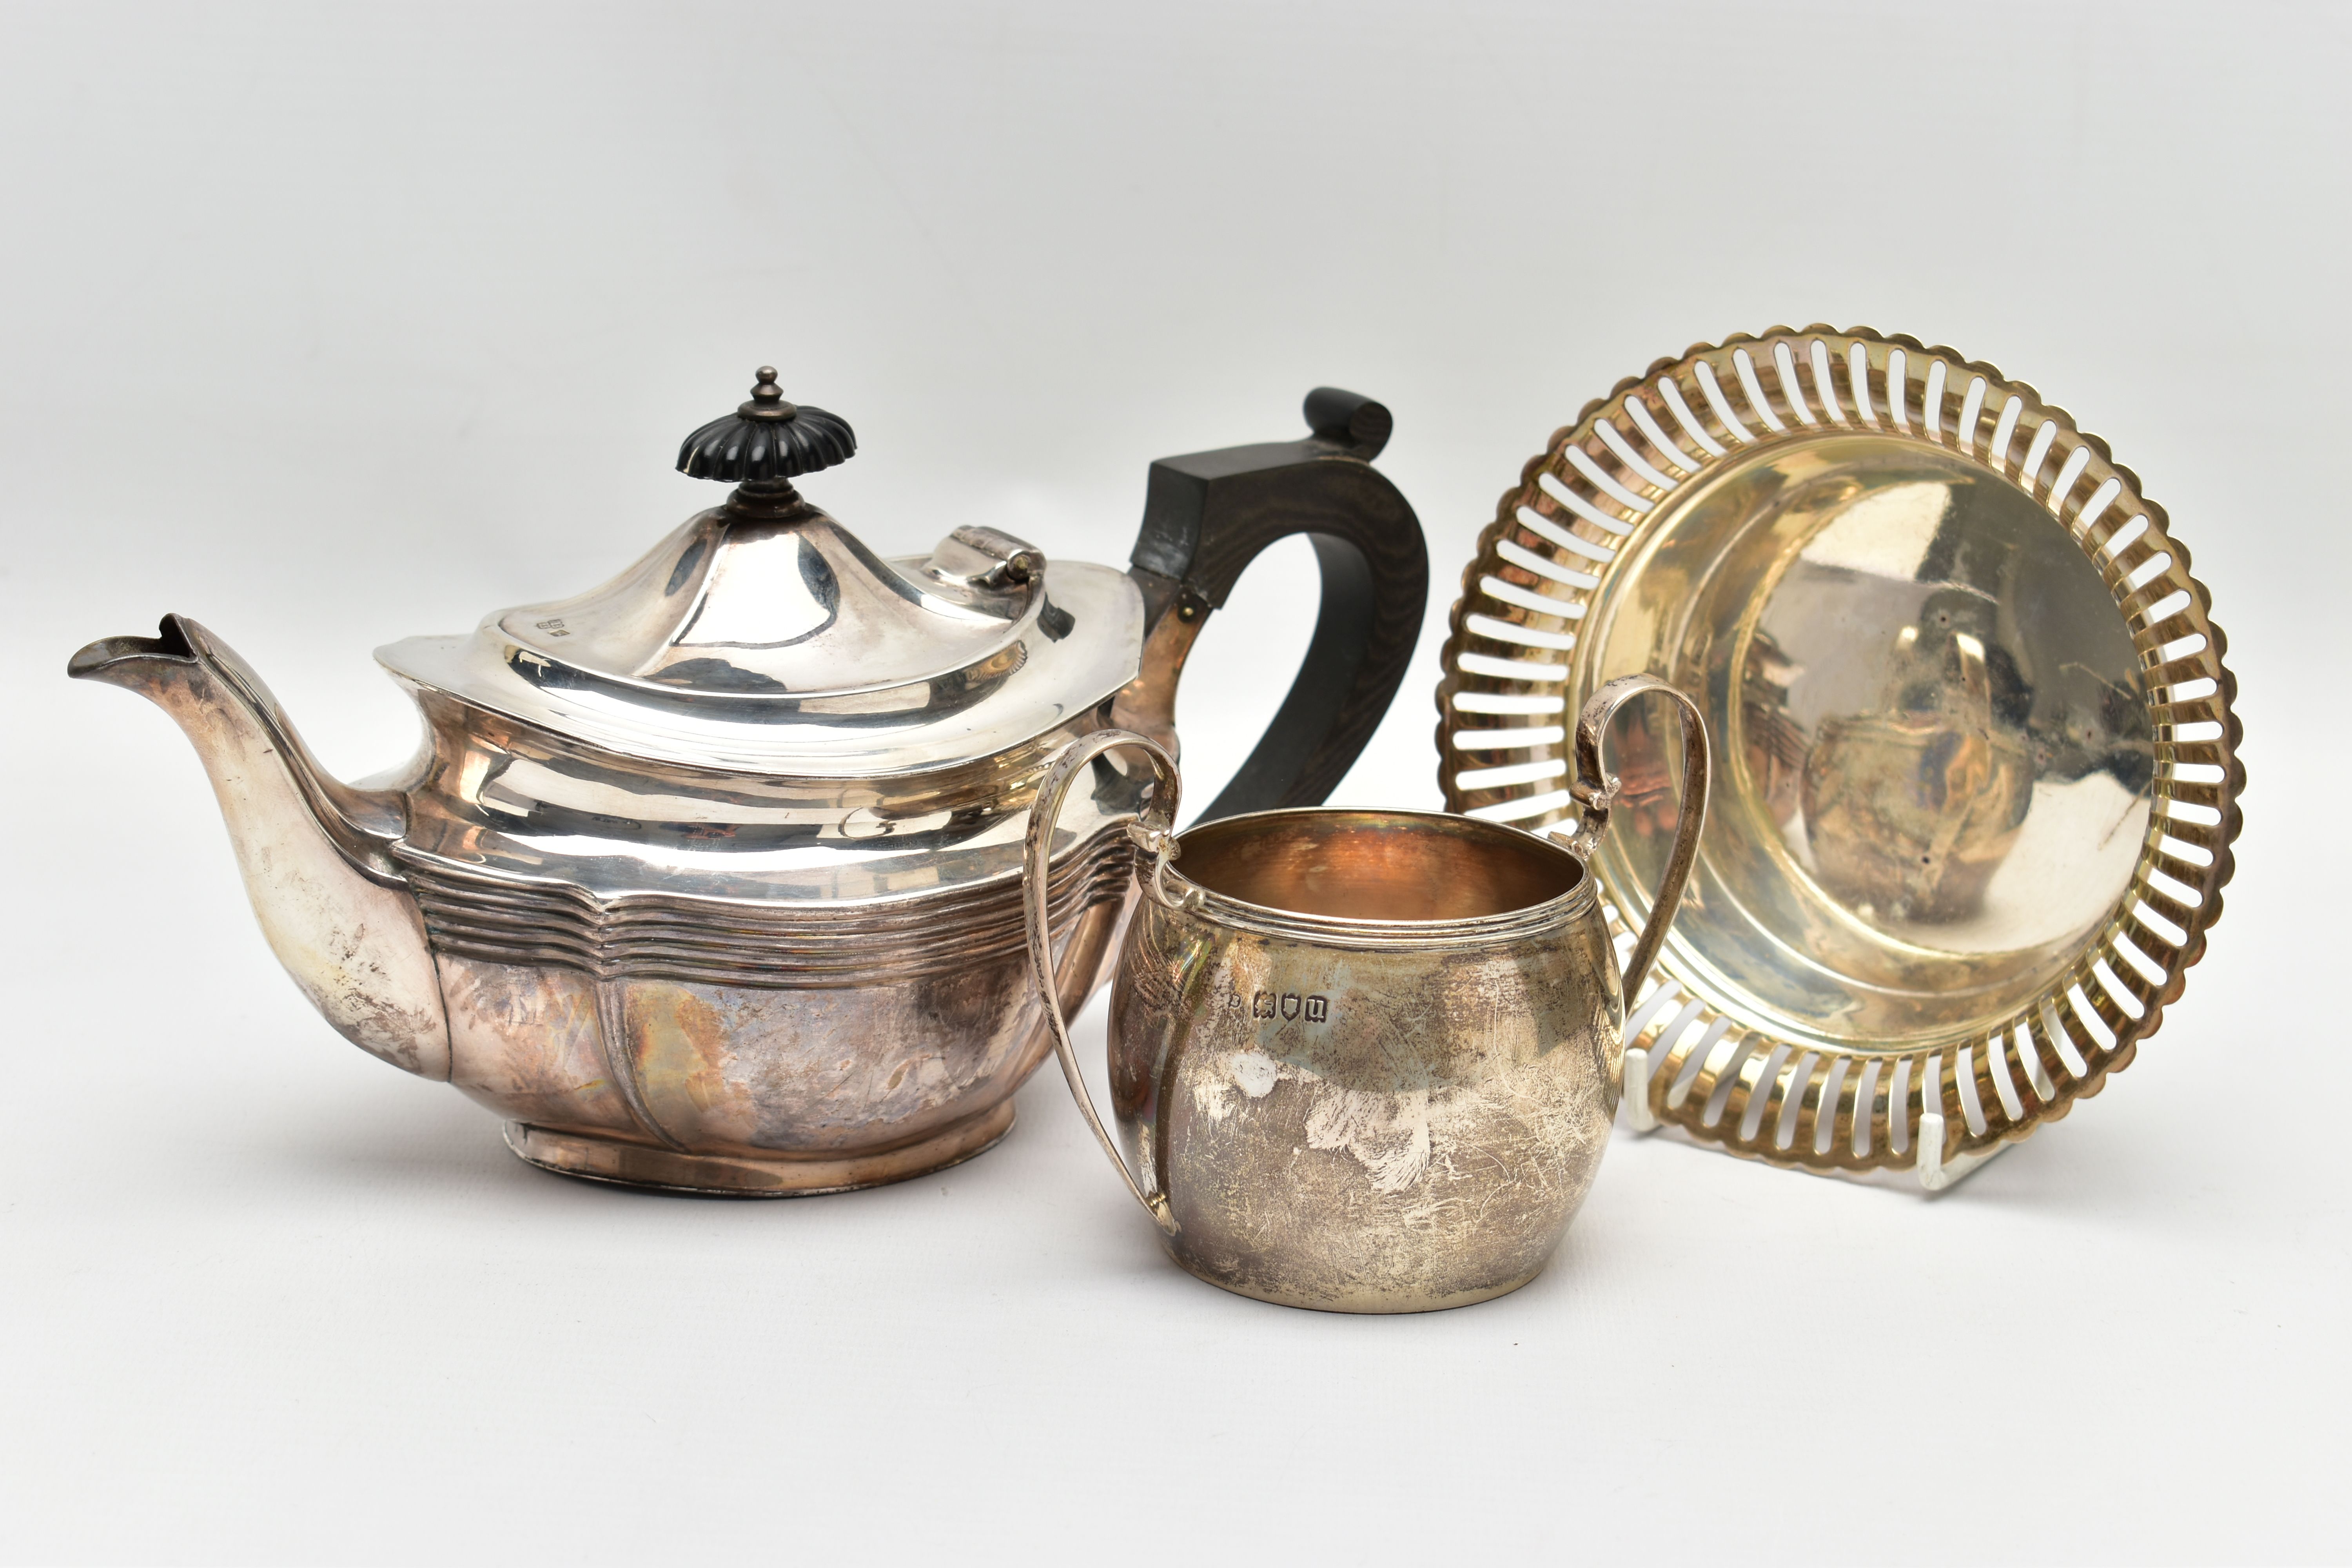 AN EDWARDIAN SILVER BACHELOR'S TEA POT OF SHAPED OVAL FORM, A TWIN HANDLED SILVER SUGAR BOWL AND A